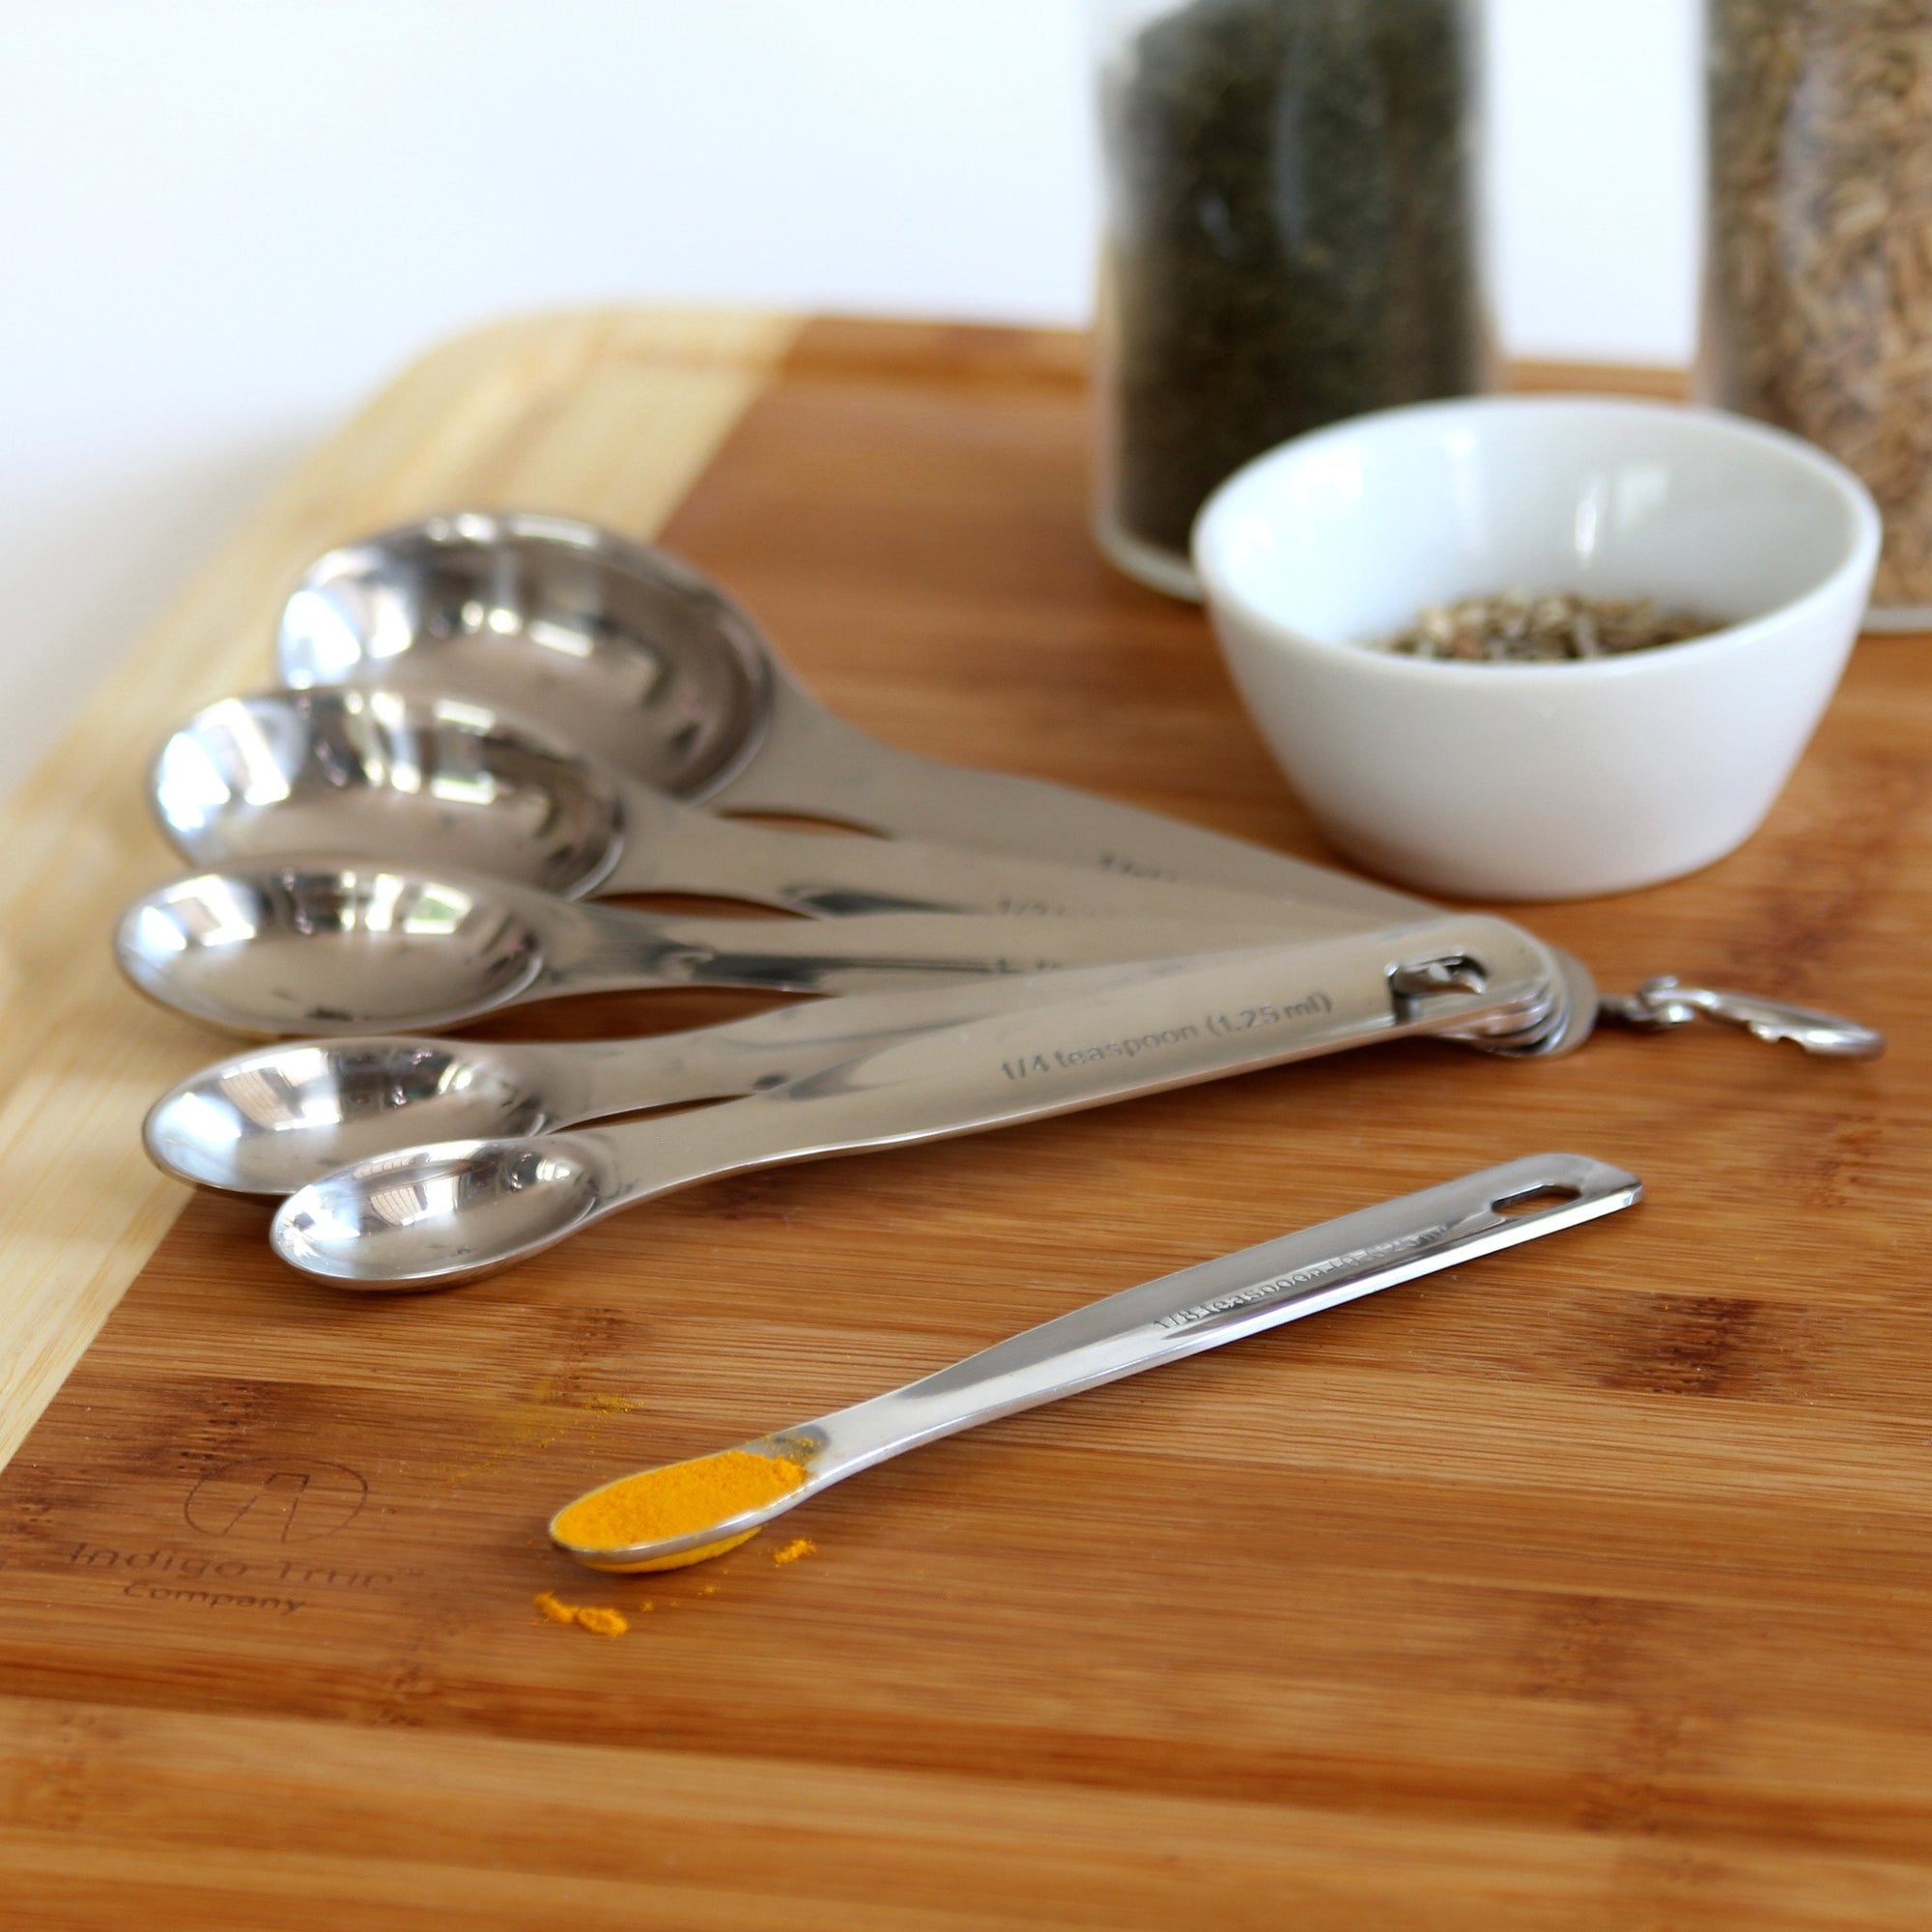 Measuring spoons, measuring cups and spoons set, measuring spoons and cups,teaspoon  measuring spoons, Set of 6 